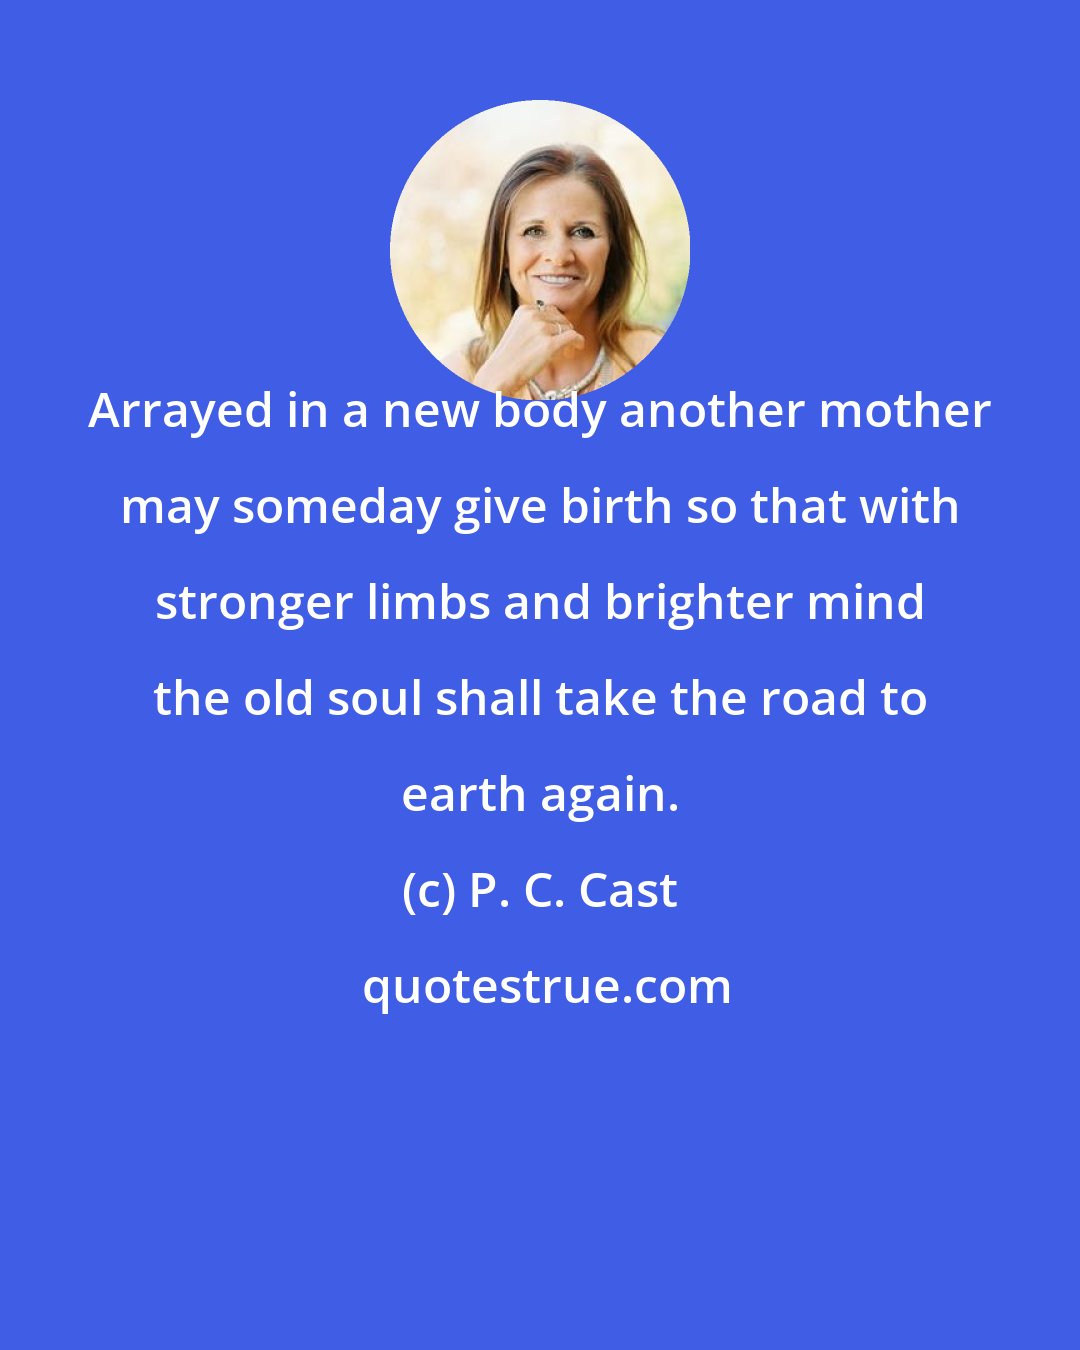 P. C. Cast: Arrayed in a new body another mother may someday give birth so that with stronger limbs and brighter mind the old soul shall take the road to earth again.